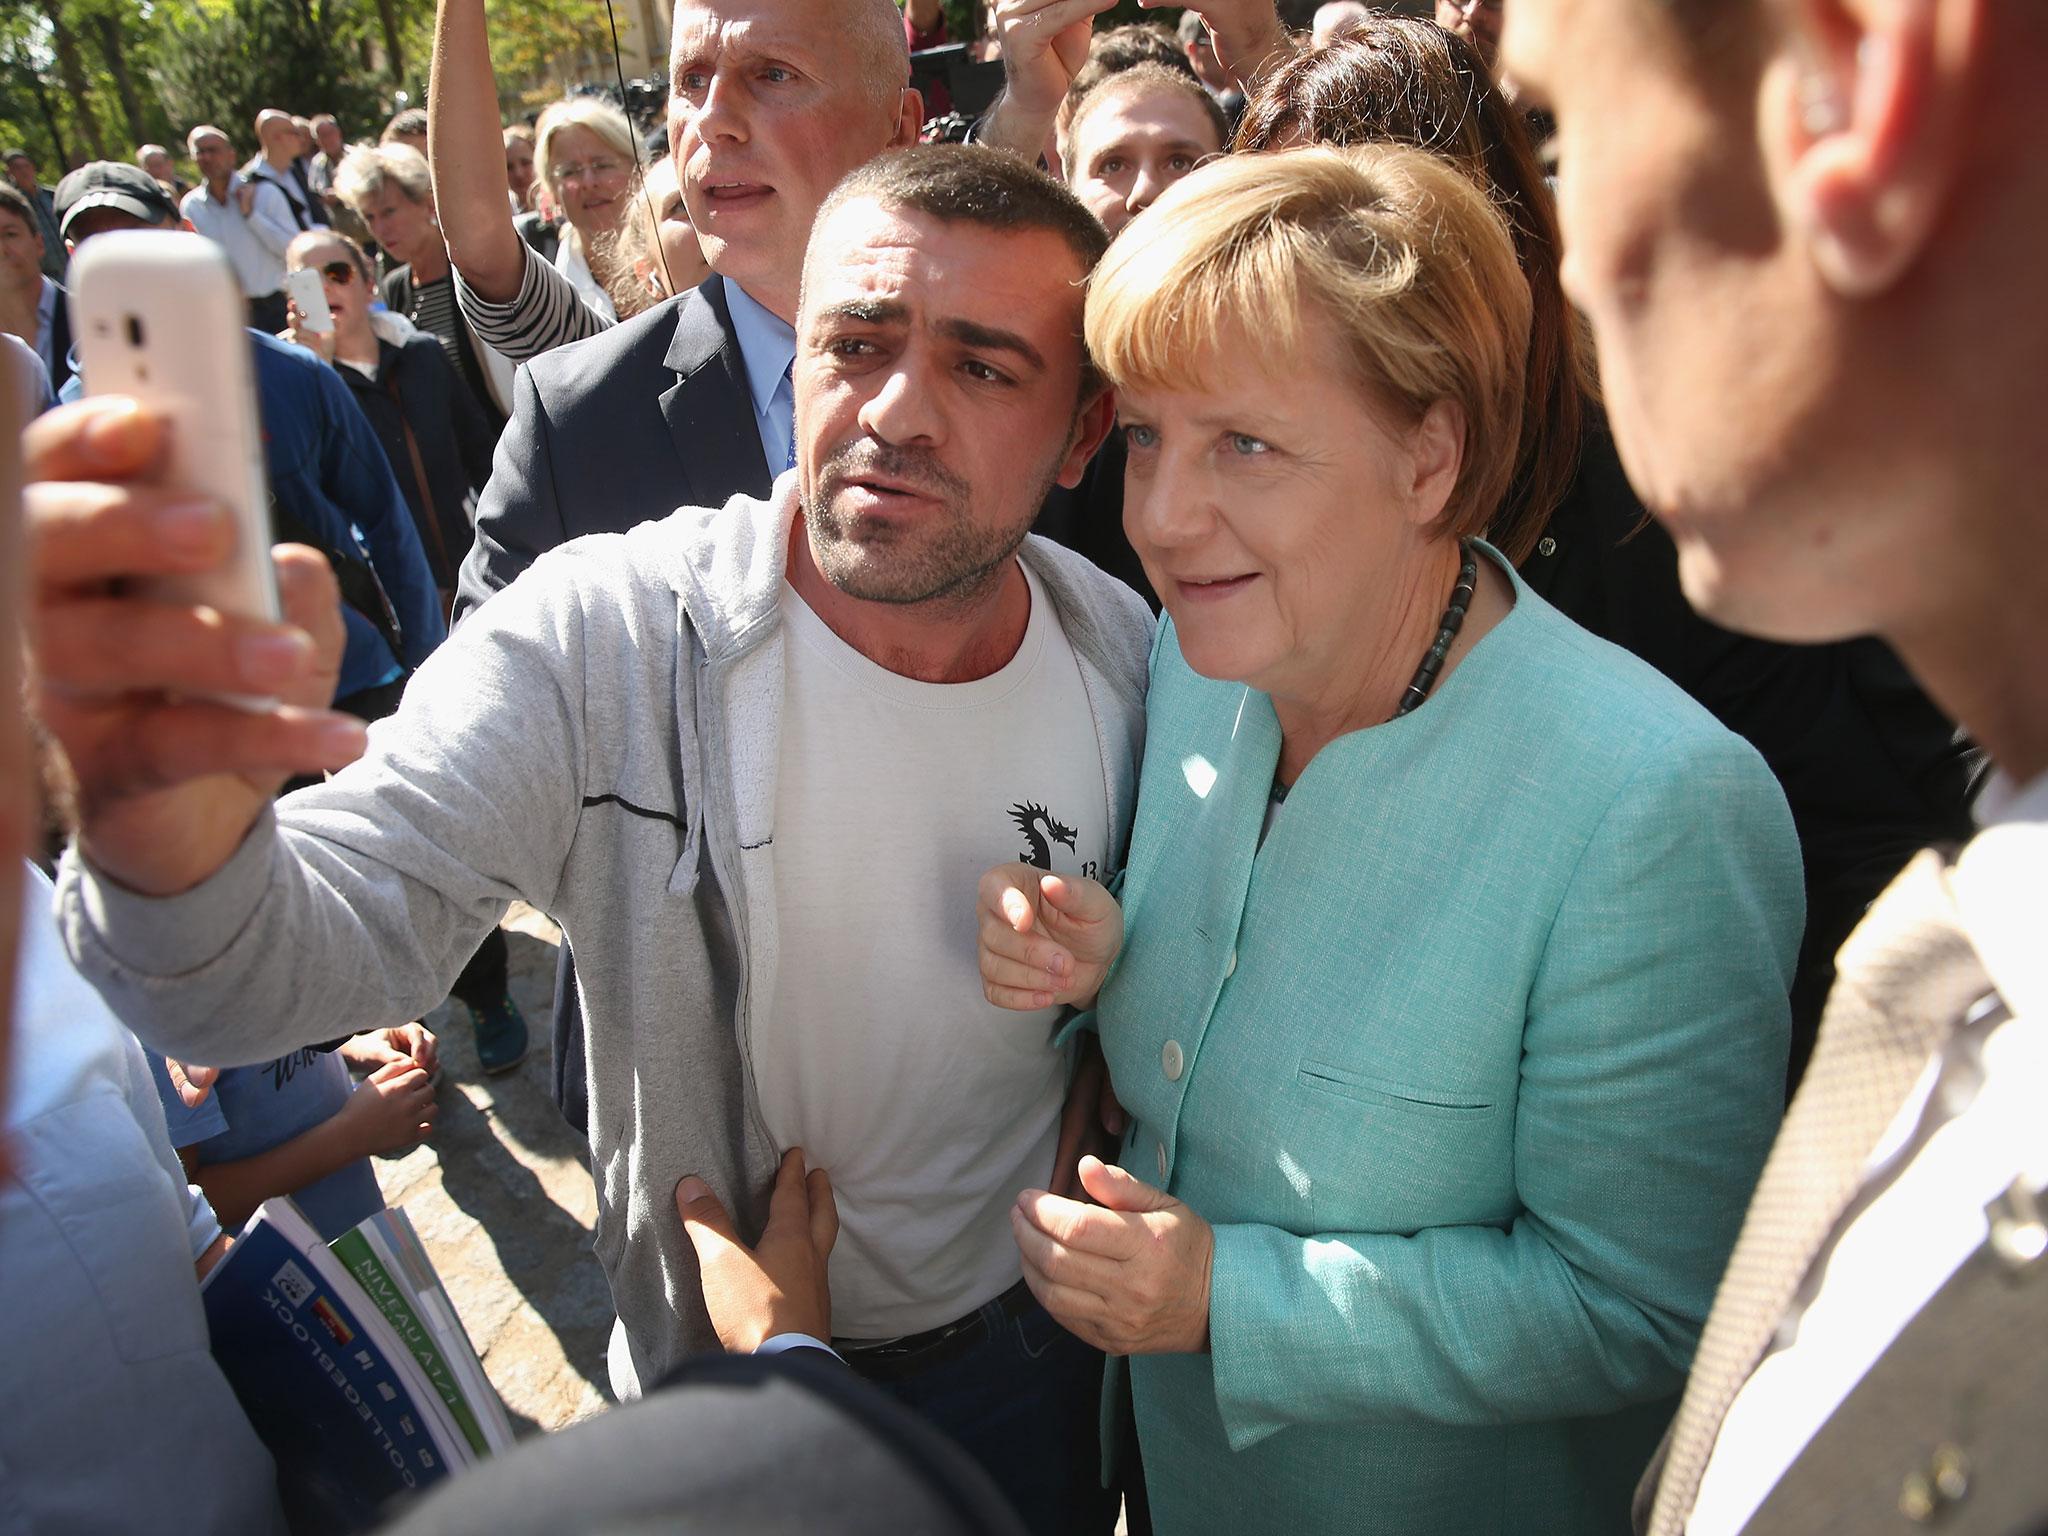 German Chancellor Angela Merkel paused for a selfie with a refugee after she visited the AWO Refugium Askanierring shelter in Berlin, Germany, on 10 September, 2015